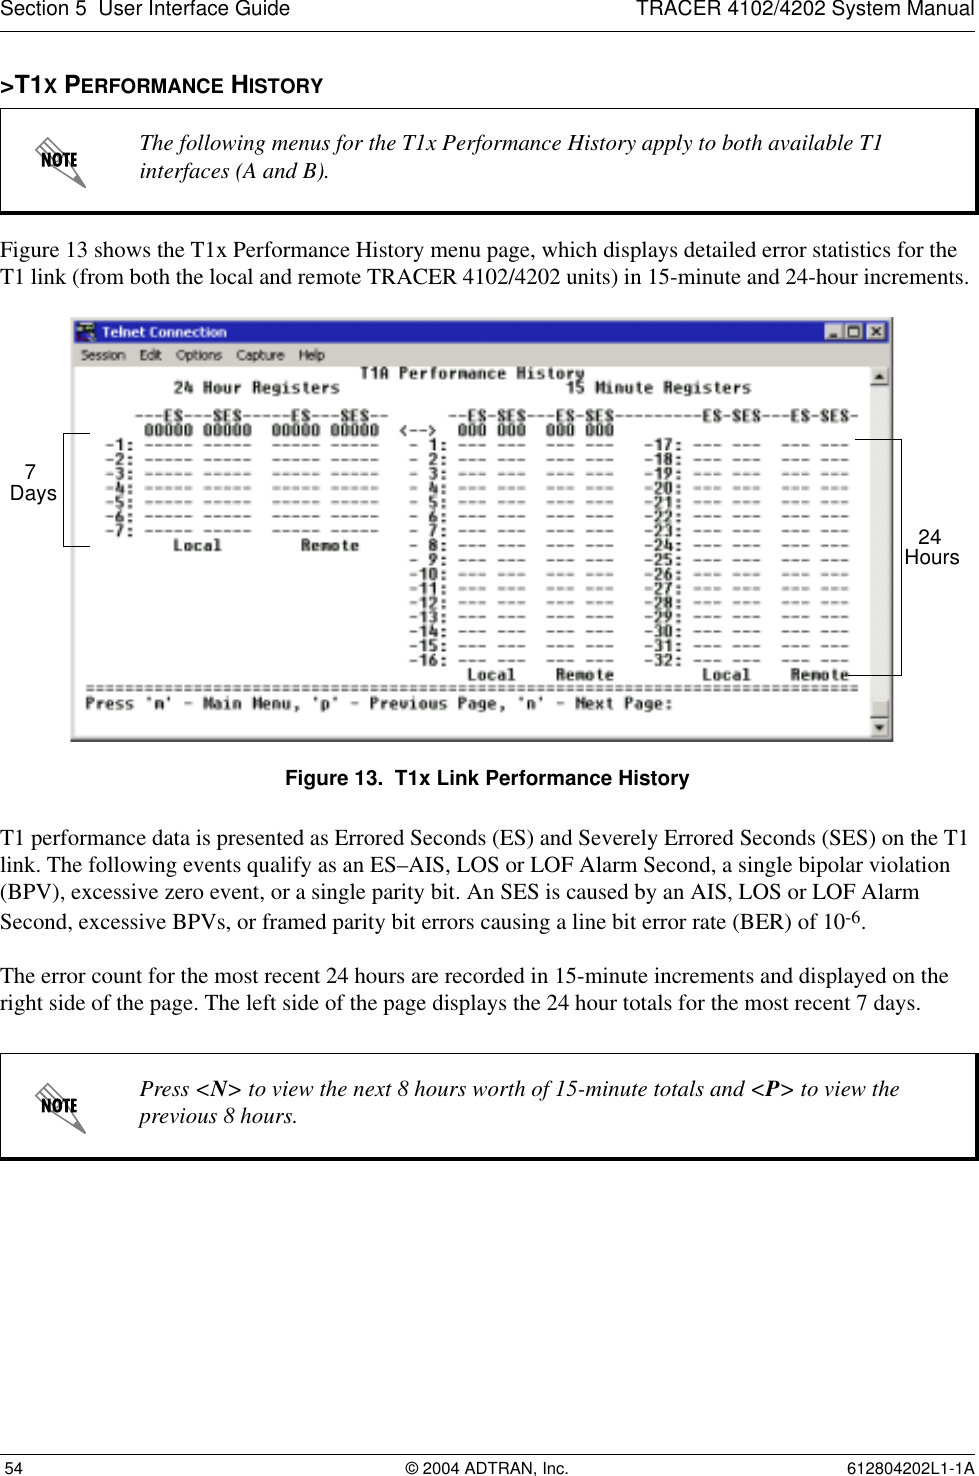 Section 5  User Interface Guide TRACER 4102/4202 System Manual 54 © 2004 ADTRAN, Inc. 612804202L1-1A&gt;T1X PERFORMANCE HISTORYFigure 13 shows the T1x Performance History menu page, which displays detailed error statistics for the T1 link (from both the local and remote TRACER 4102/4202 units) in 15-minute and 24-hour increments. Figure 13.  T1x Link Performance HistoryT1 performance data is presented as Errored Seconds (ES) and Severely Errored Seconds (SES) on the T1 link. The following events qualify as an ES–AIS, LOS or LOF Alarm Second, a single bipolar violation (BPV), excessive zero event, or a single parity bit. An SES is caused by an AIS, LOS or LOF Alarm Second, excessive BPVs, or framed parity bit errors causing a line bit error rate (BER) of 10-6.The error count for the most recent 24 hours are recorded in 15-minute increments and displayed on the right side of the page. The left side of the page displays the 24 hour totals for the most recent 7 days.The following menus for the T1x Performance History apply to both available T1 interfaces (A and B).Press &lt;N&gt; to view the next 8 hours worth of 15-minute totals and &lt;P&gt; to view the previous 8 hours.24 Hours7 Days